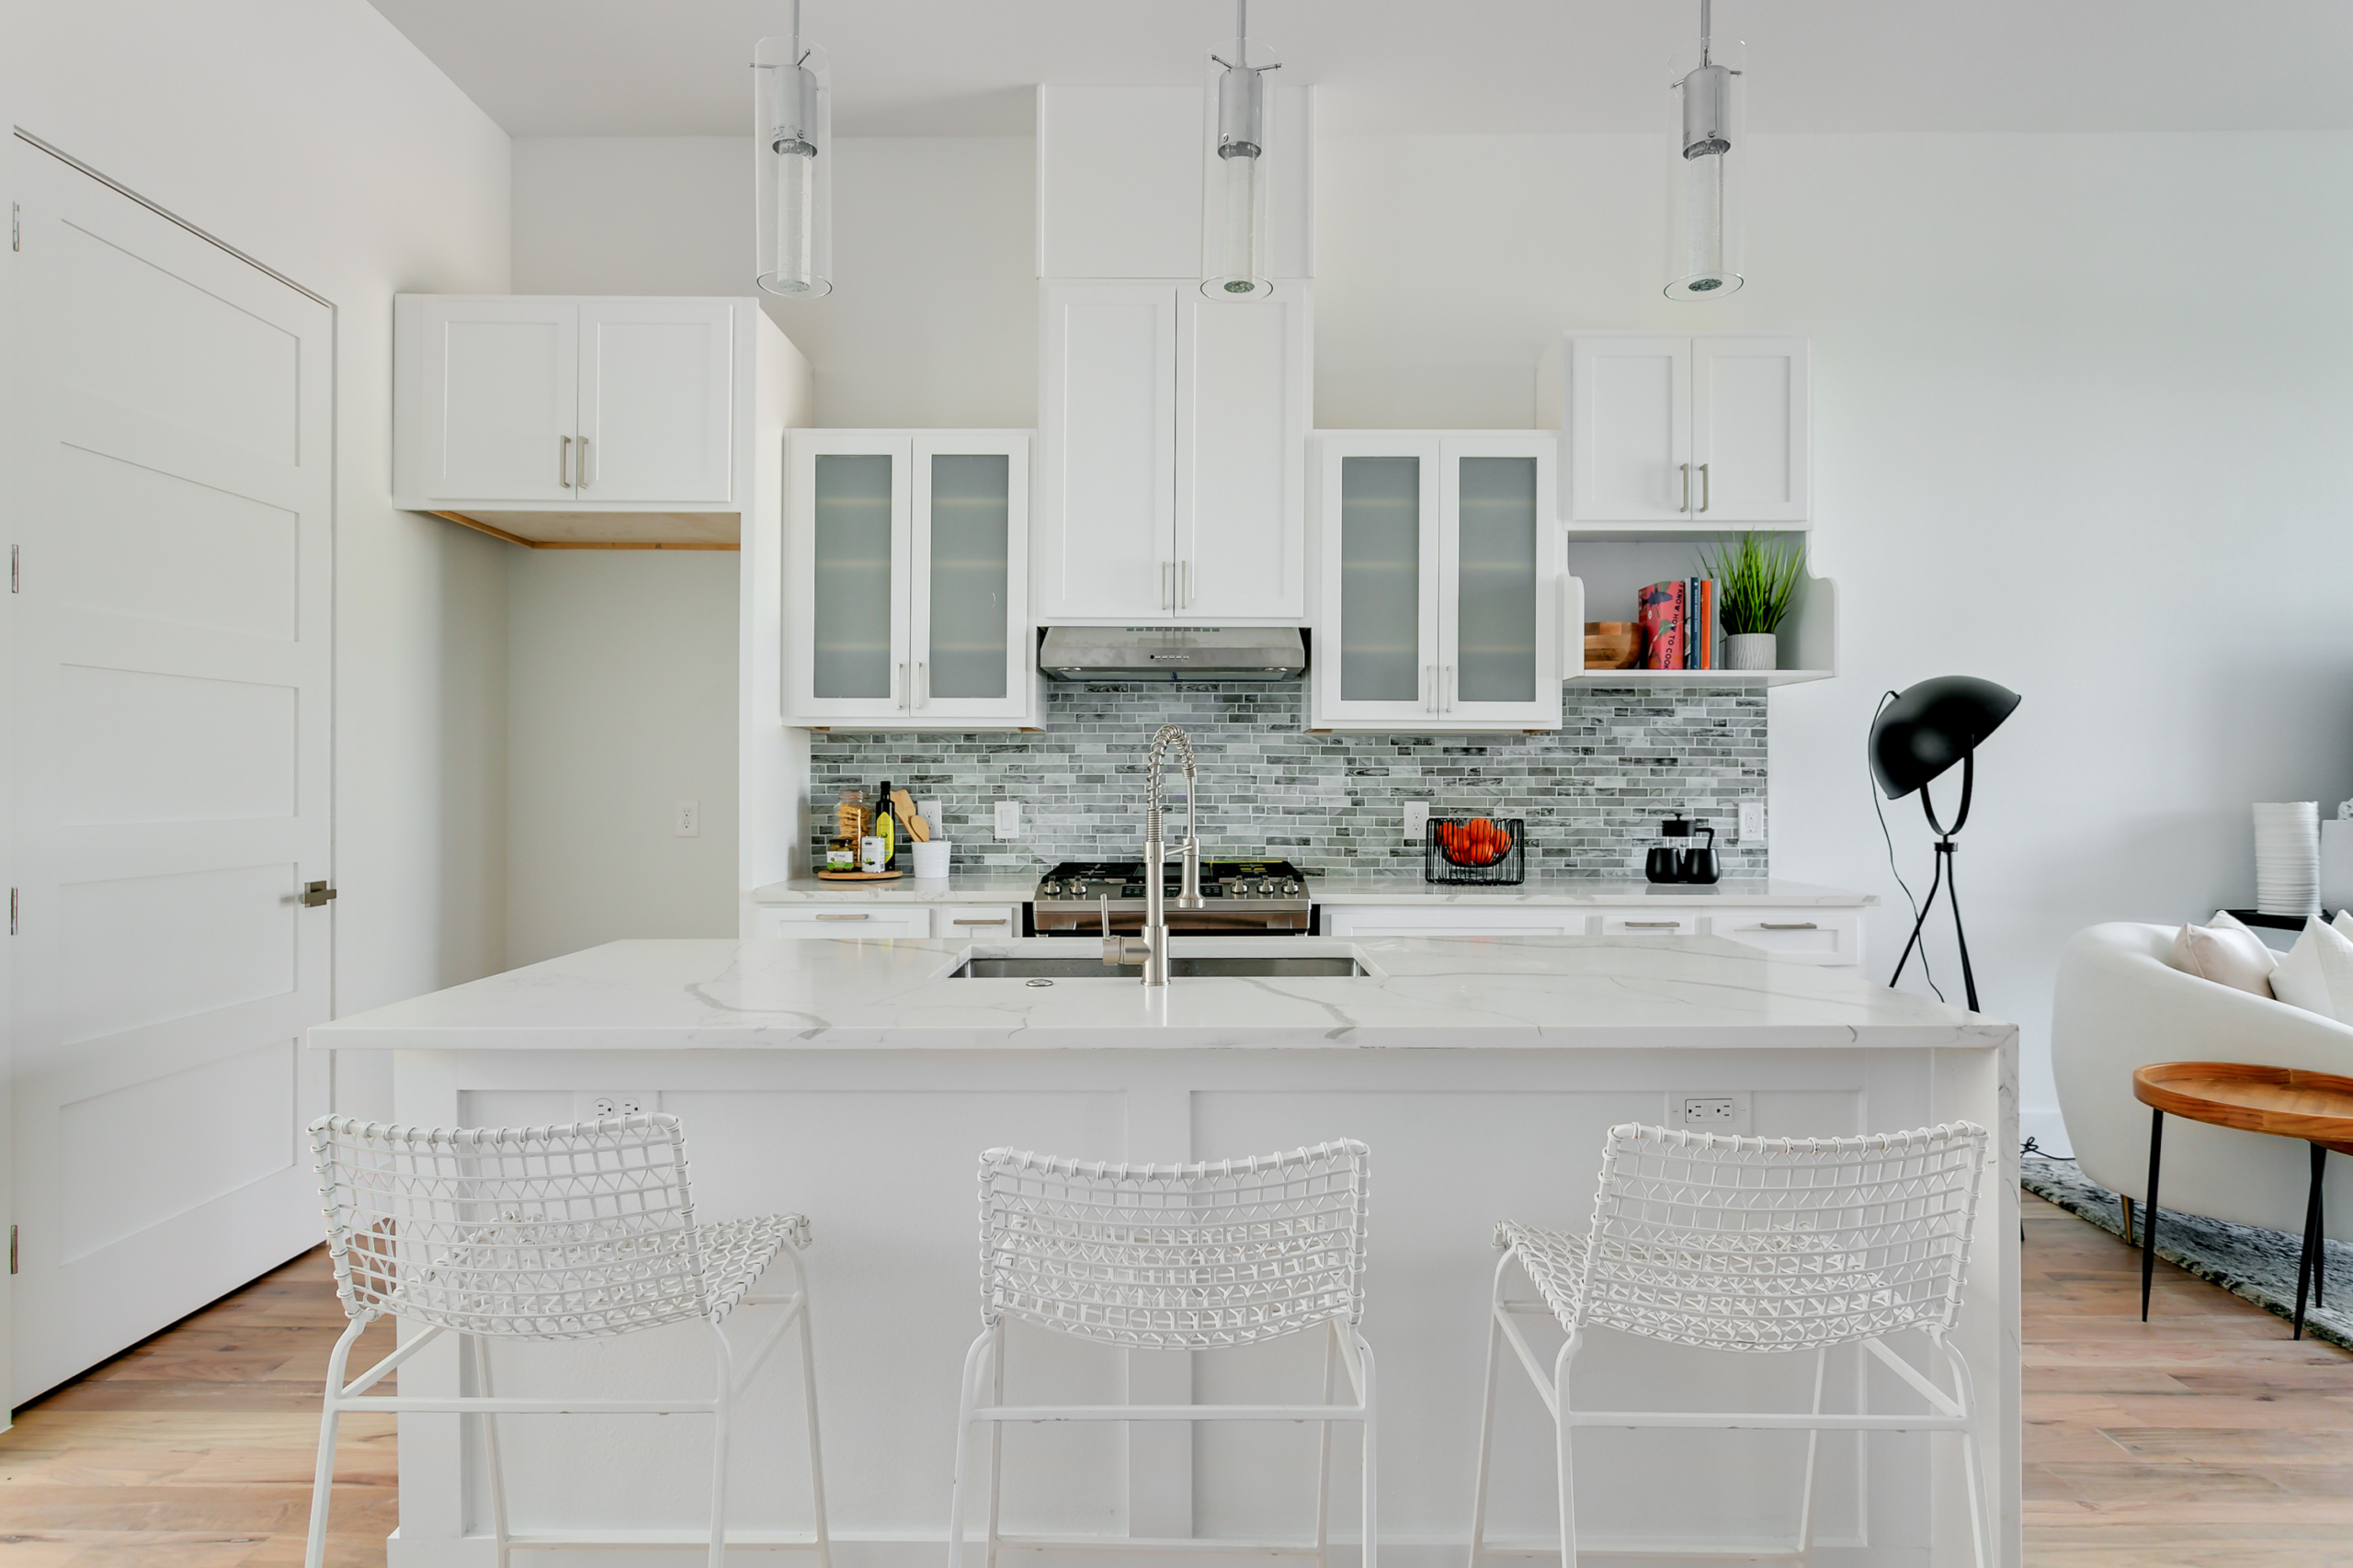 EVERYTHING YOU NEED TO KNOW BEFORE CHOOSING YOUR COUNTERTOP